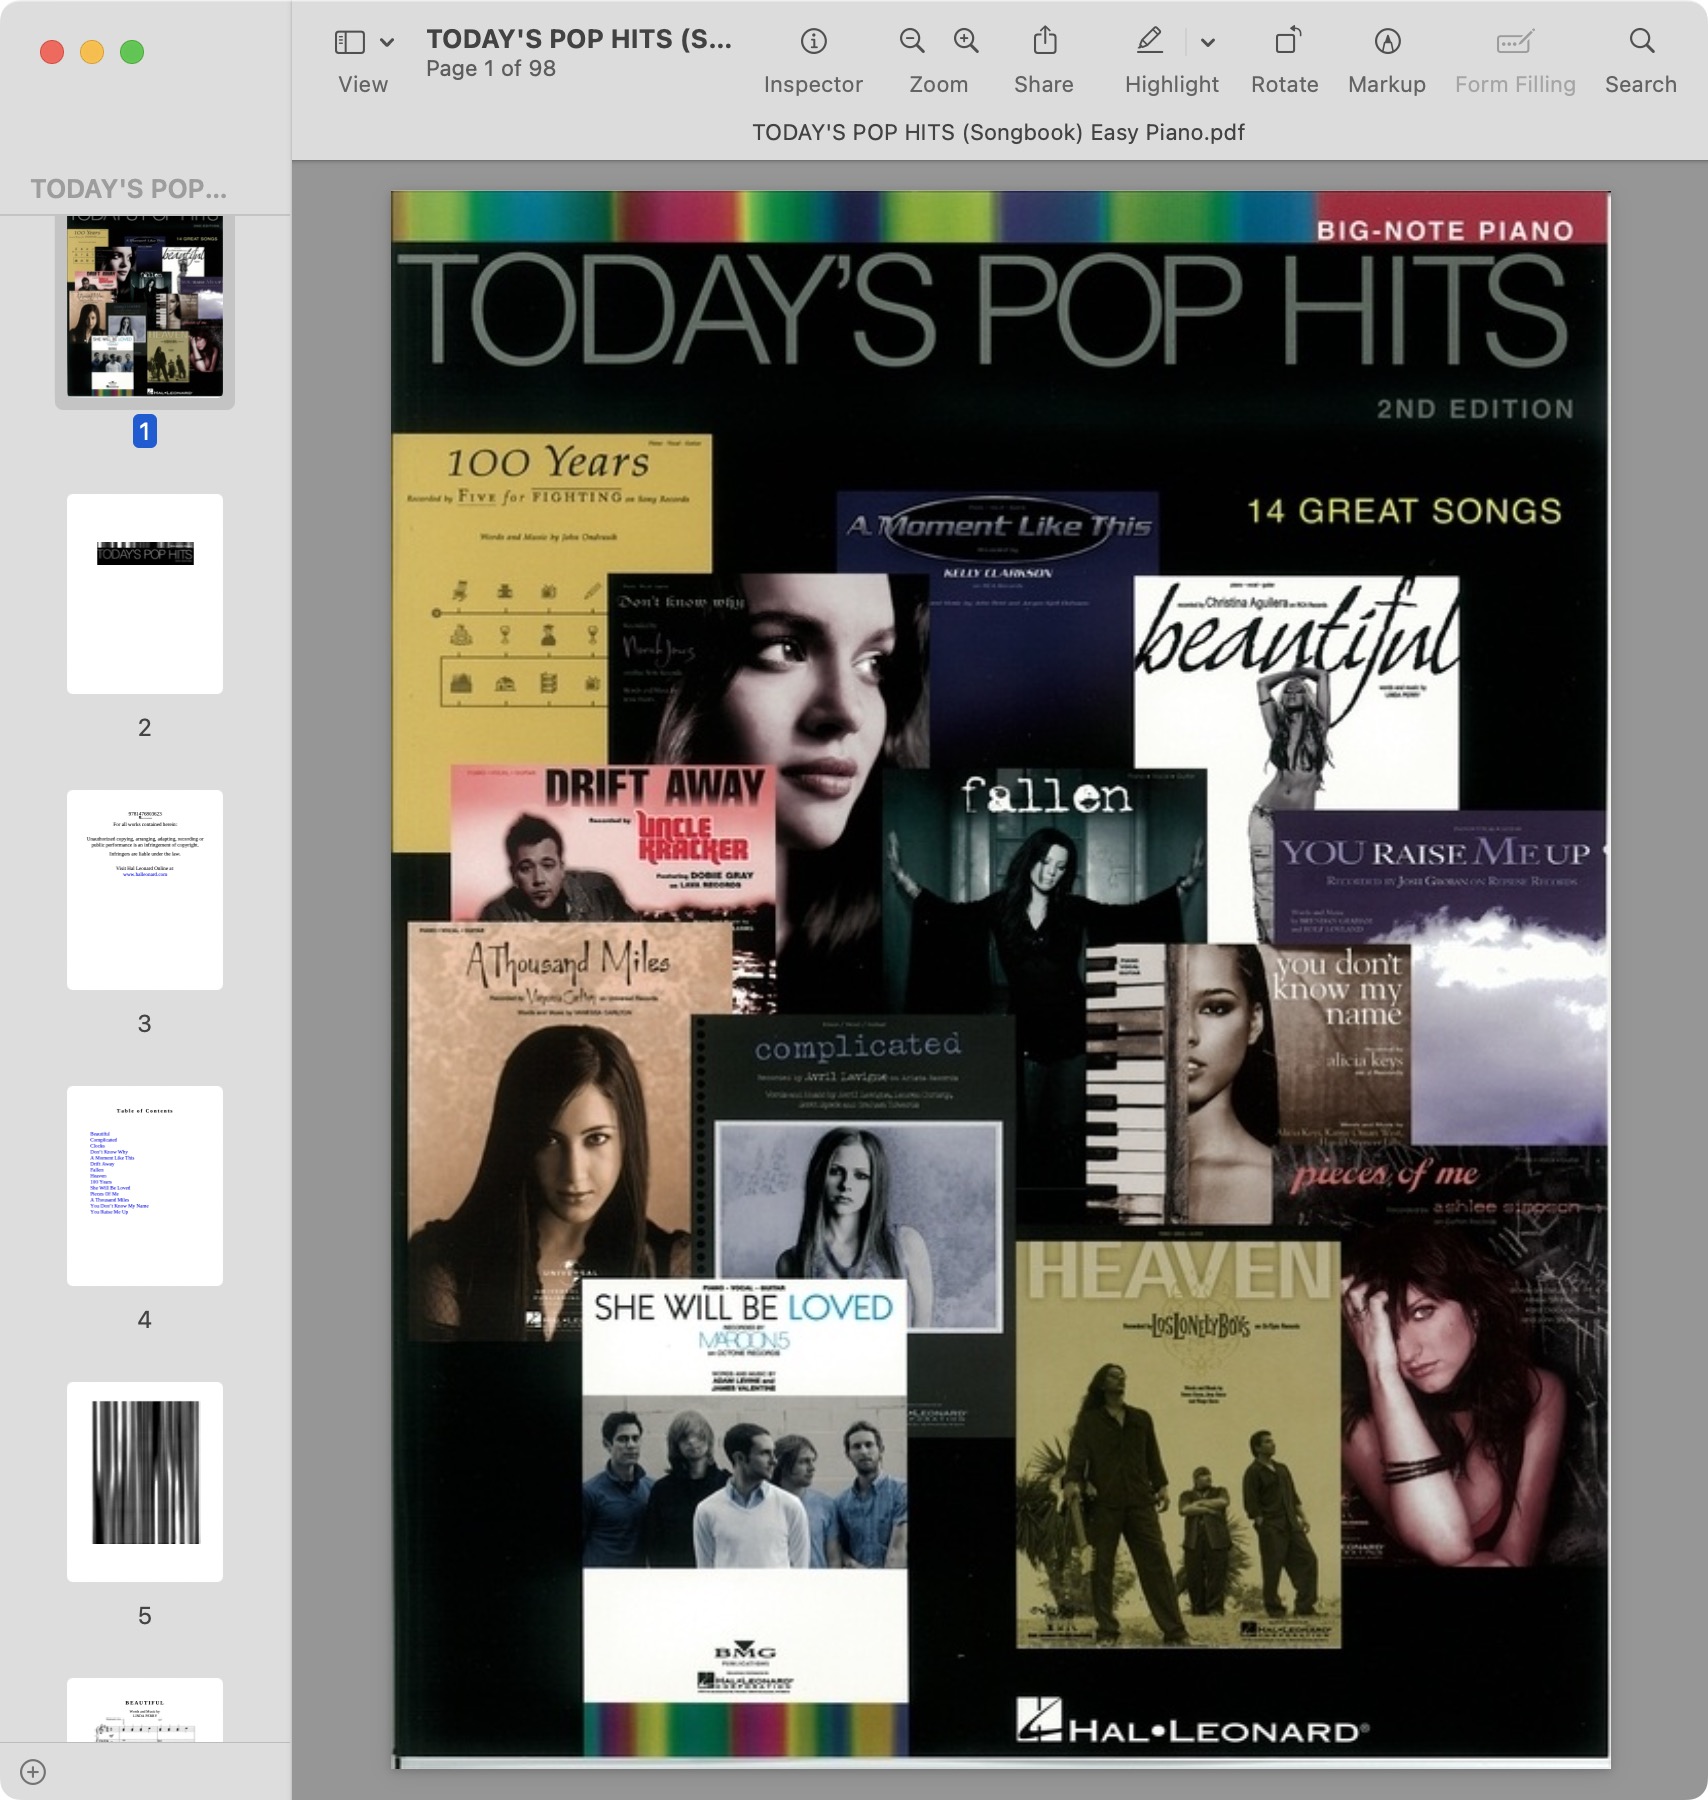 TODAY'S POP HITS (Songbook) Easy Piano.jpg